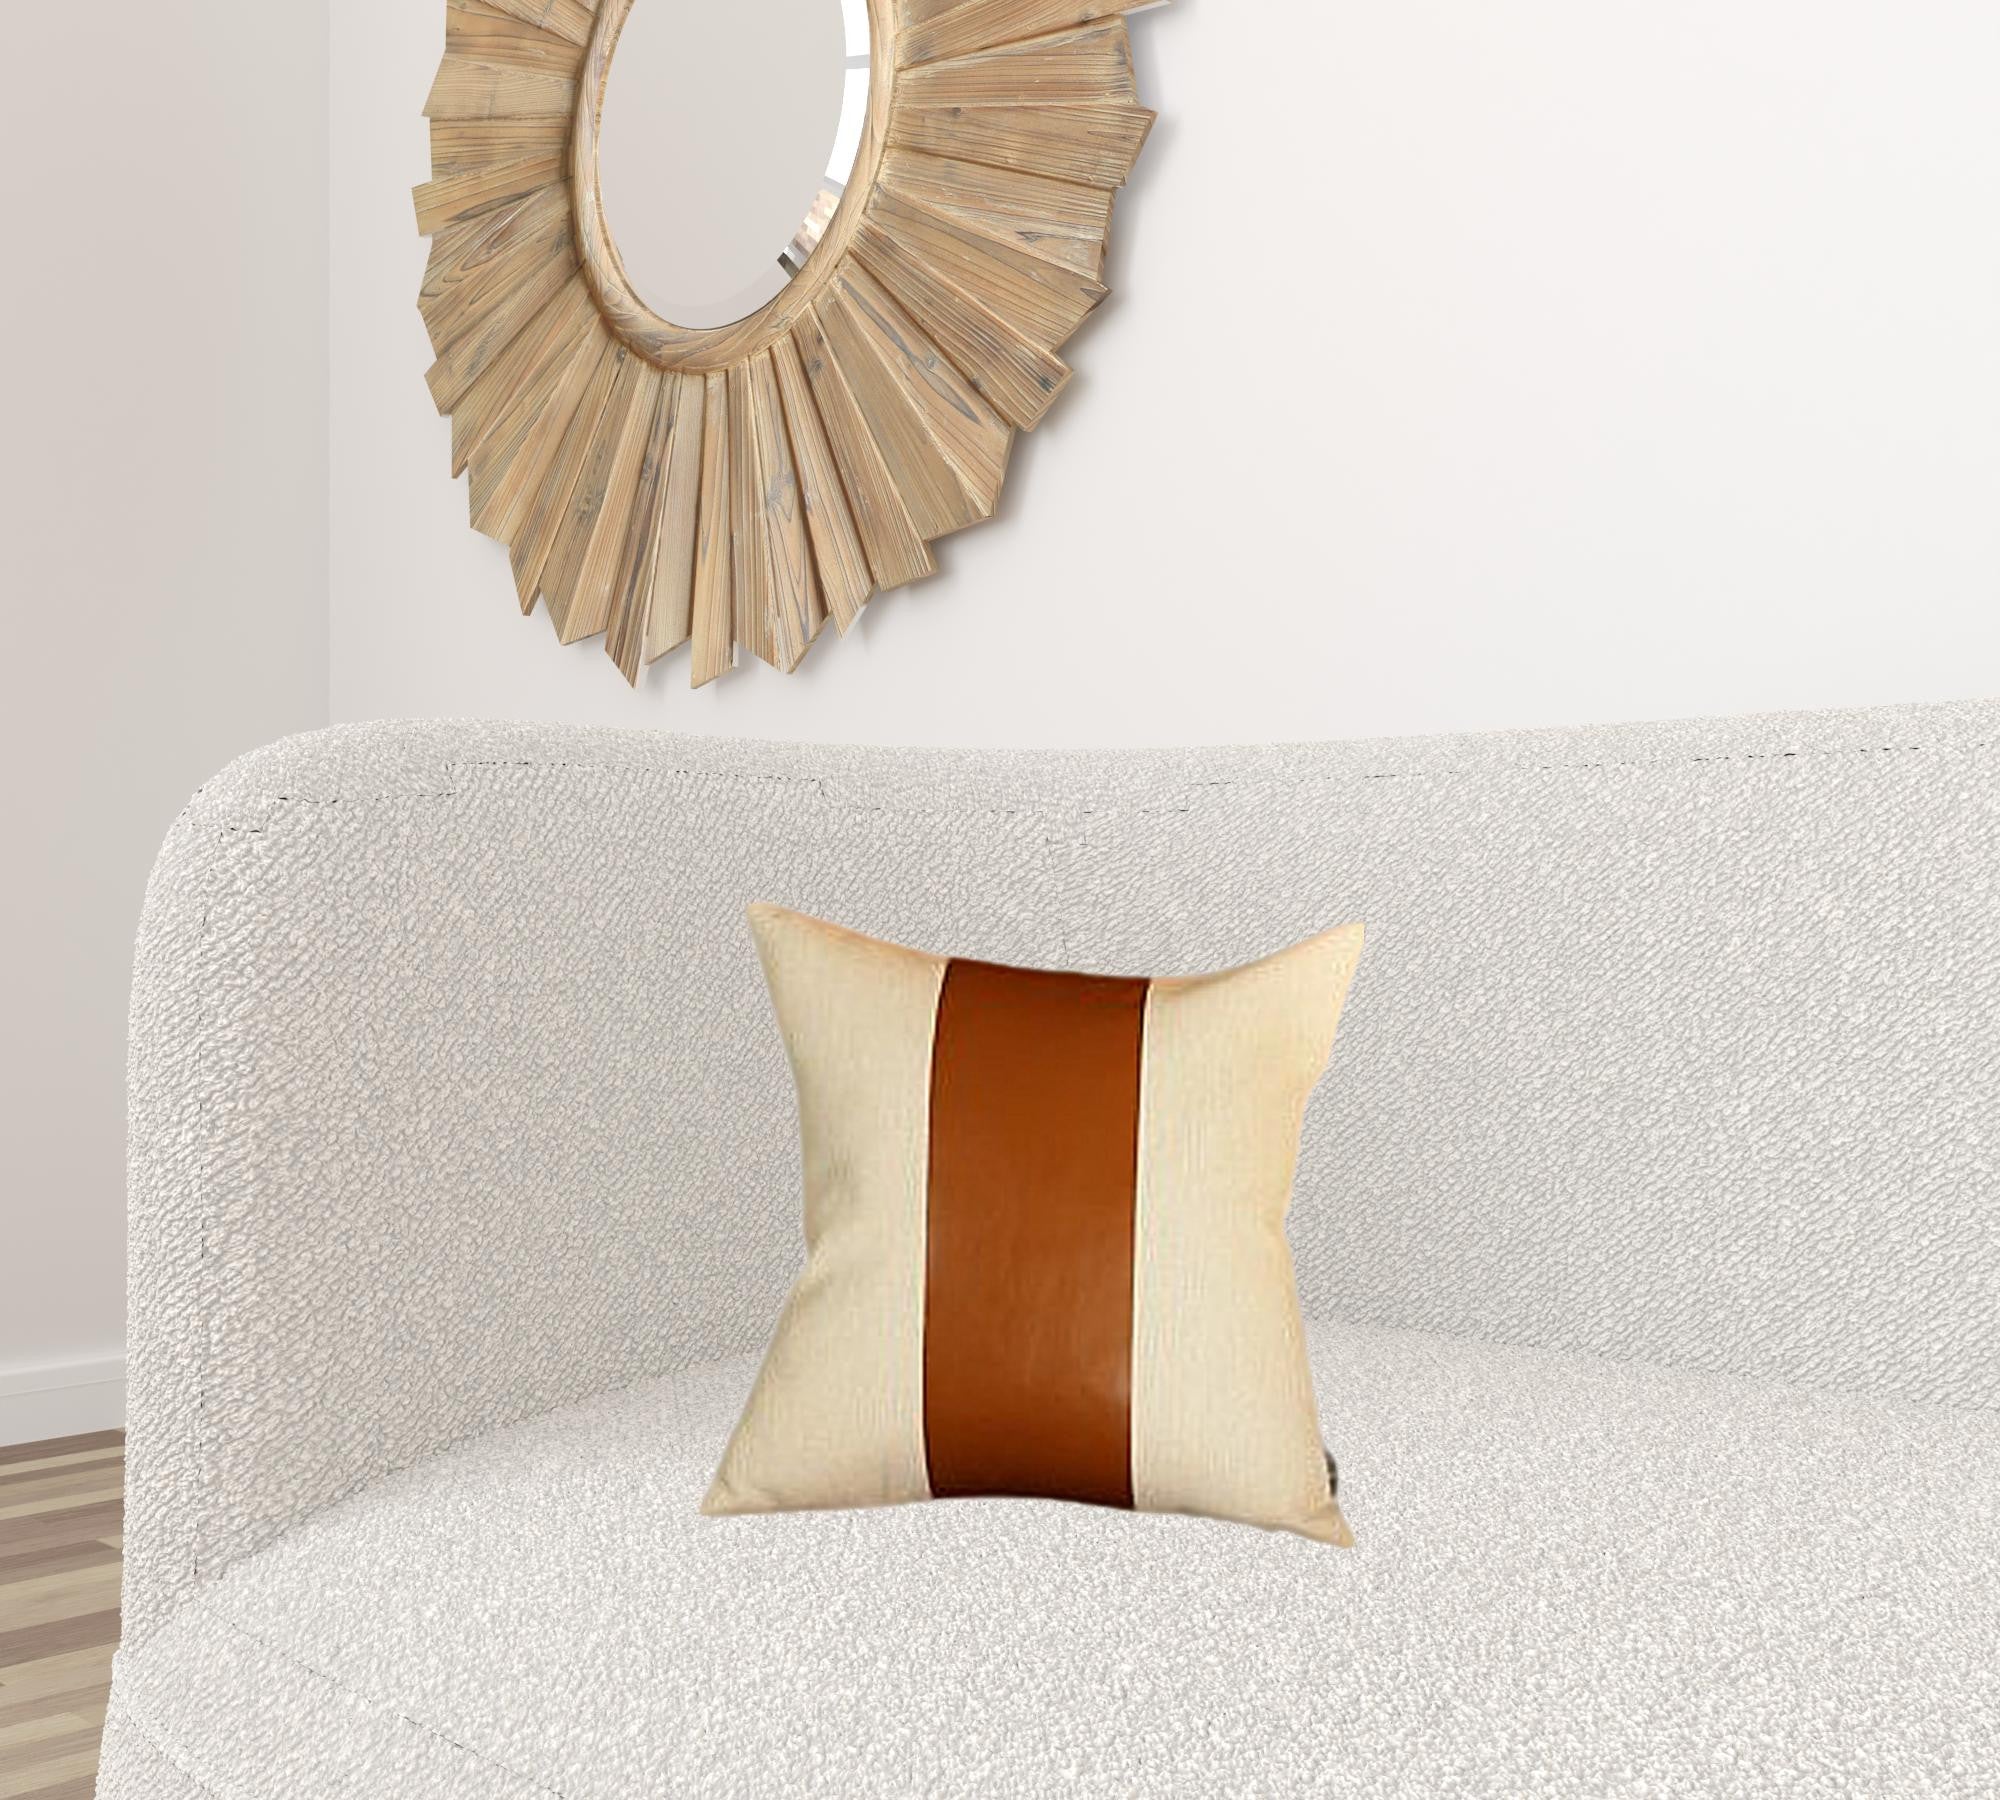 White And Brown Faux Leather Square Pillow Cover